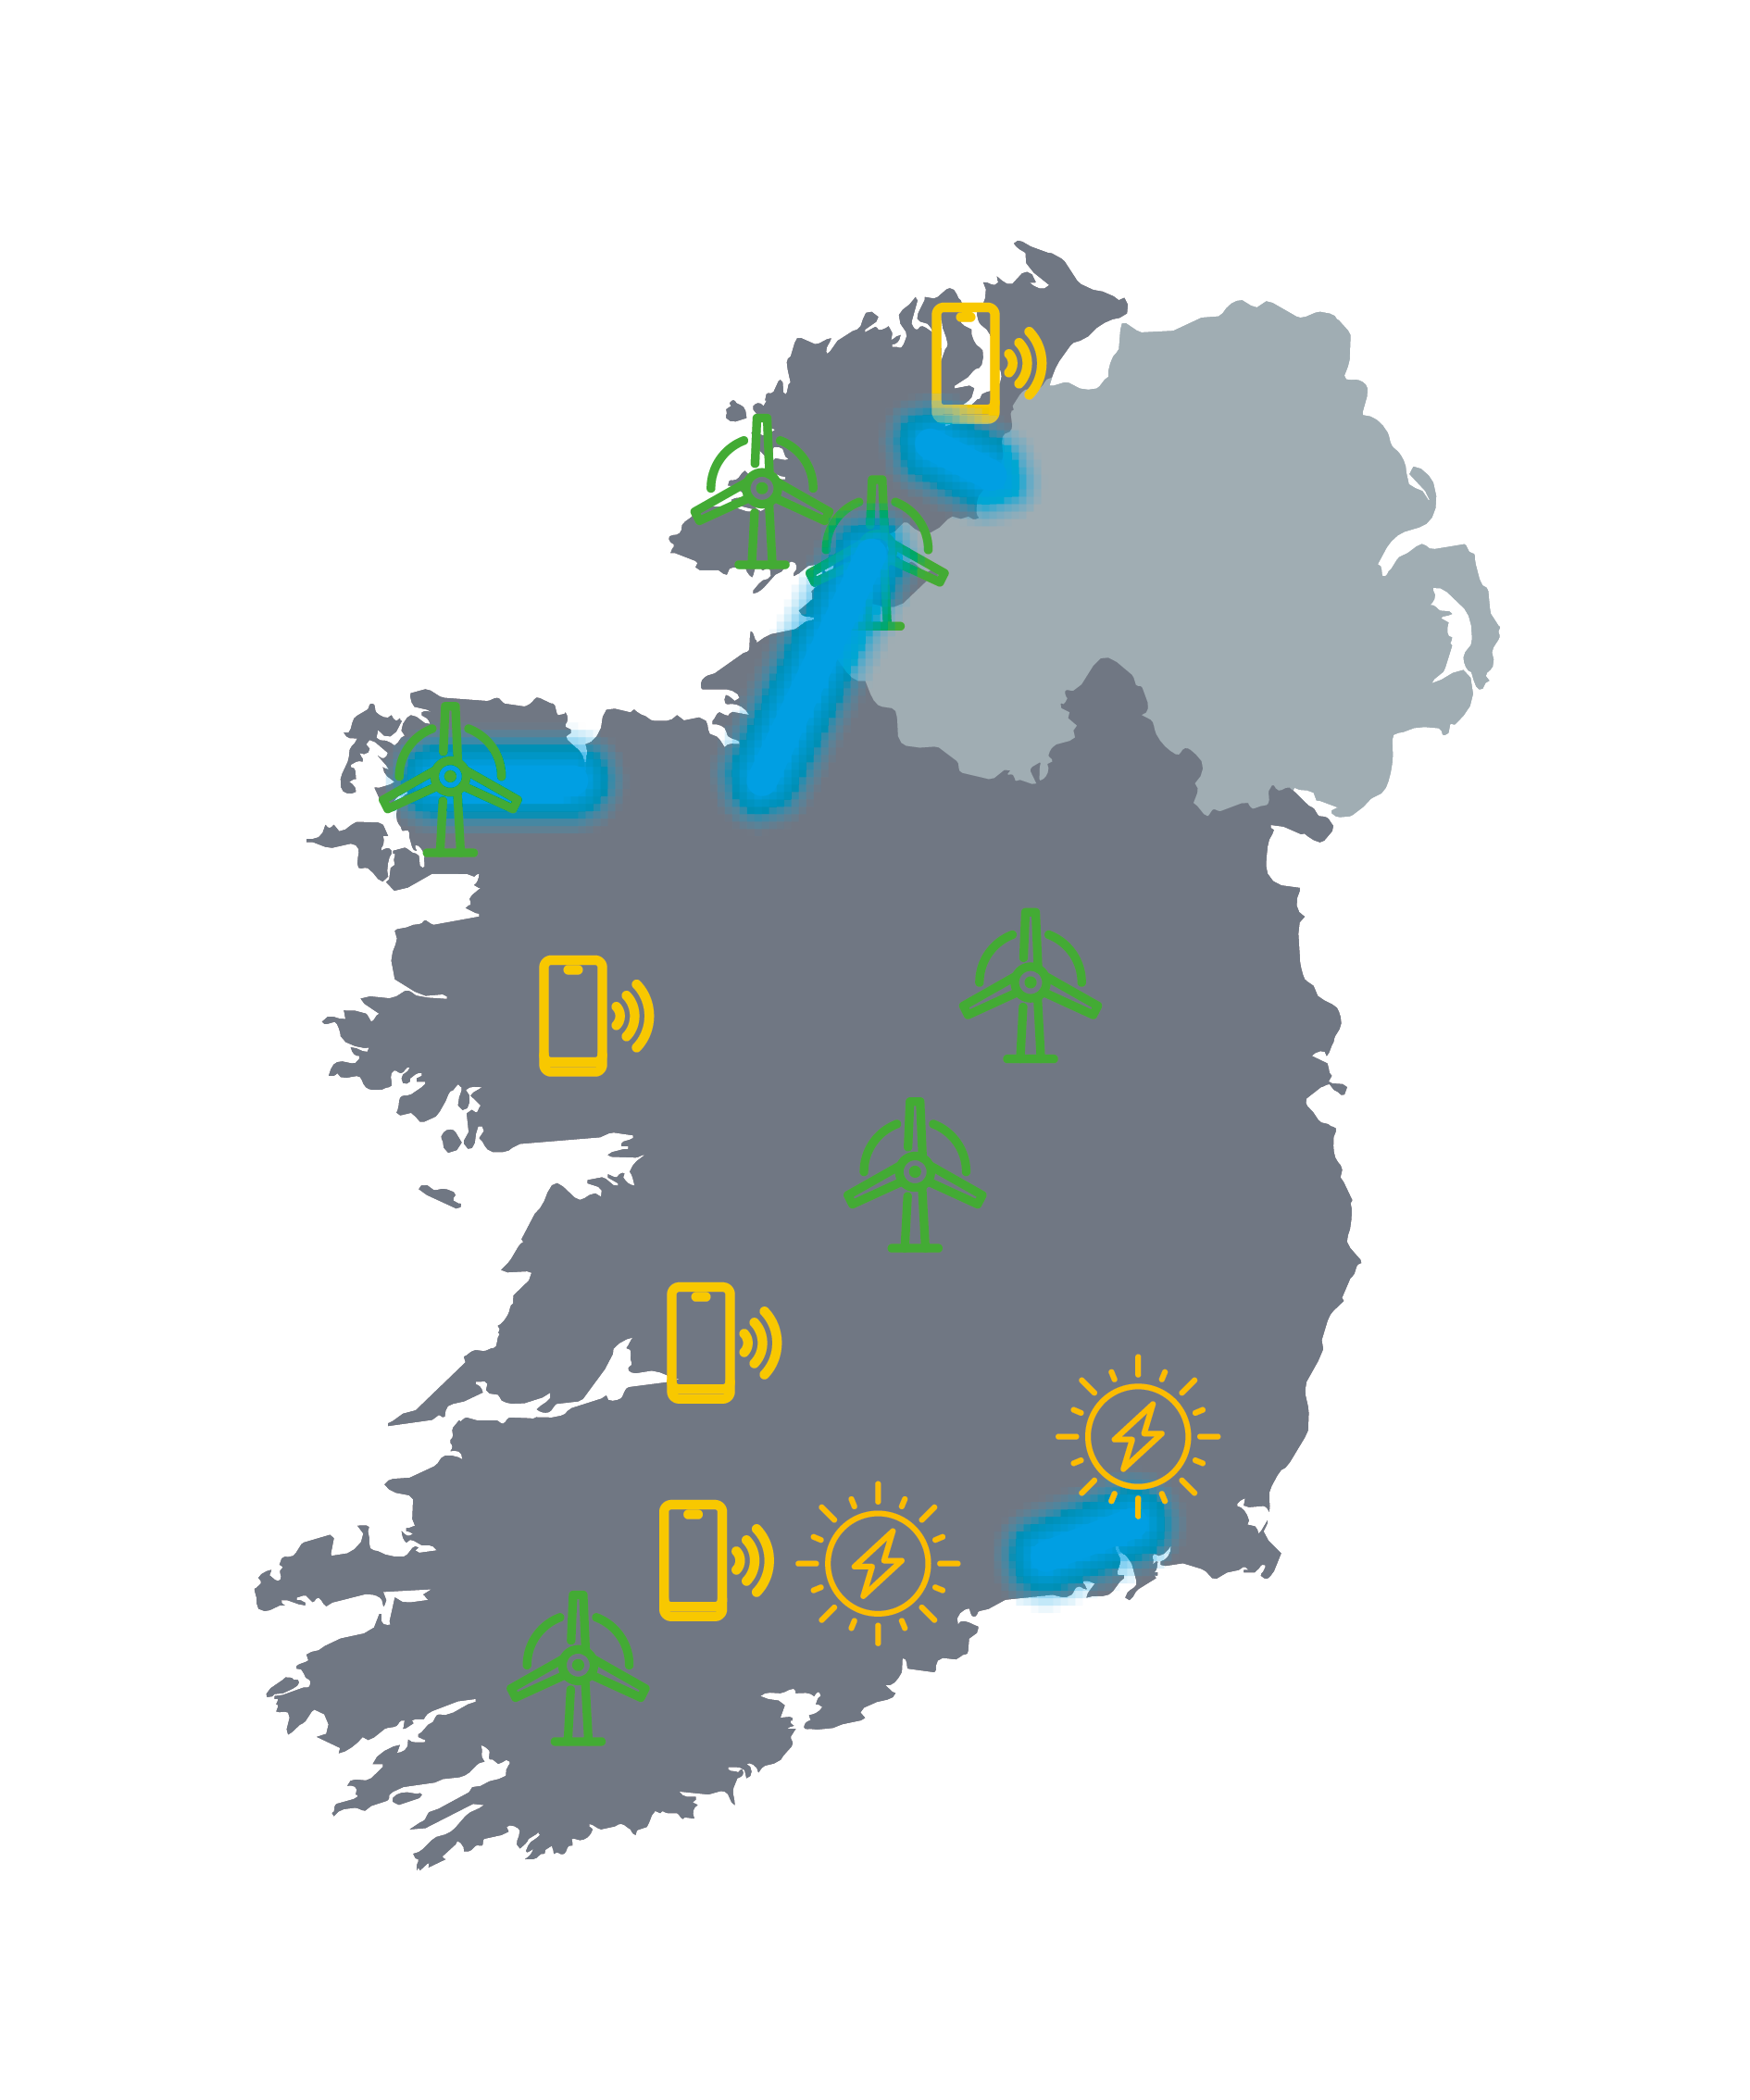 Map of Ireland illustrating approach 4